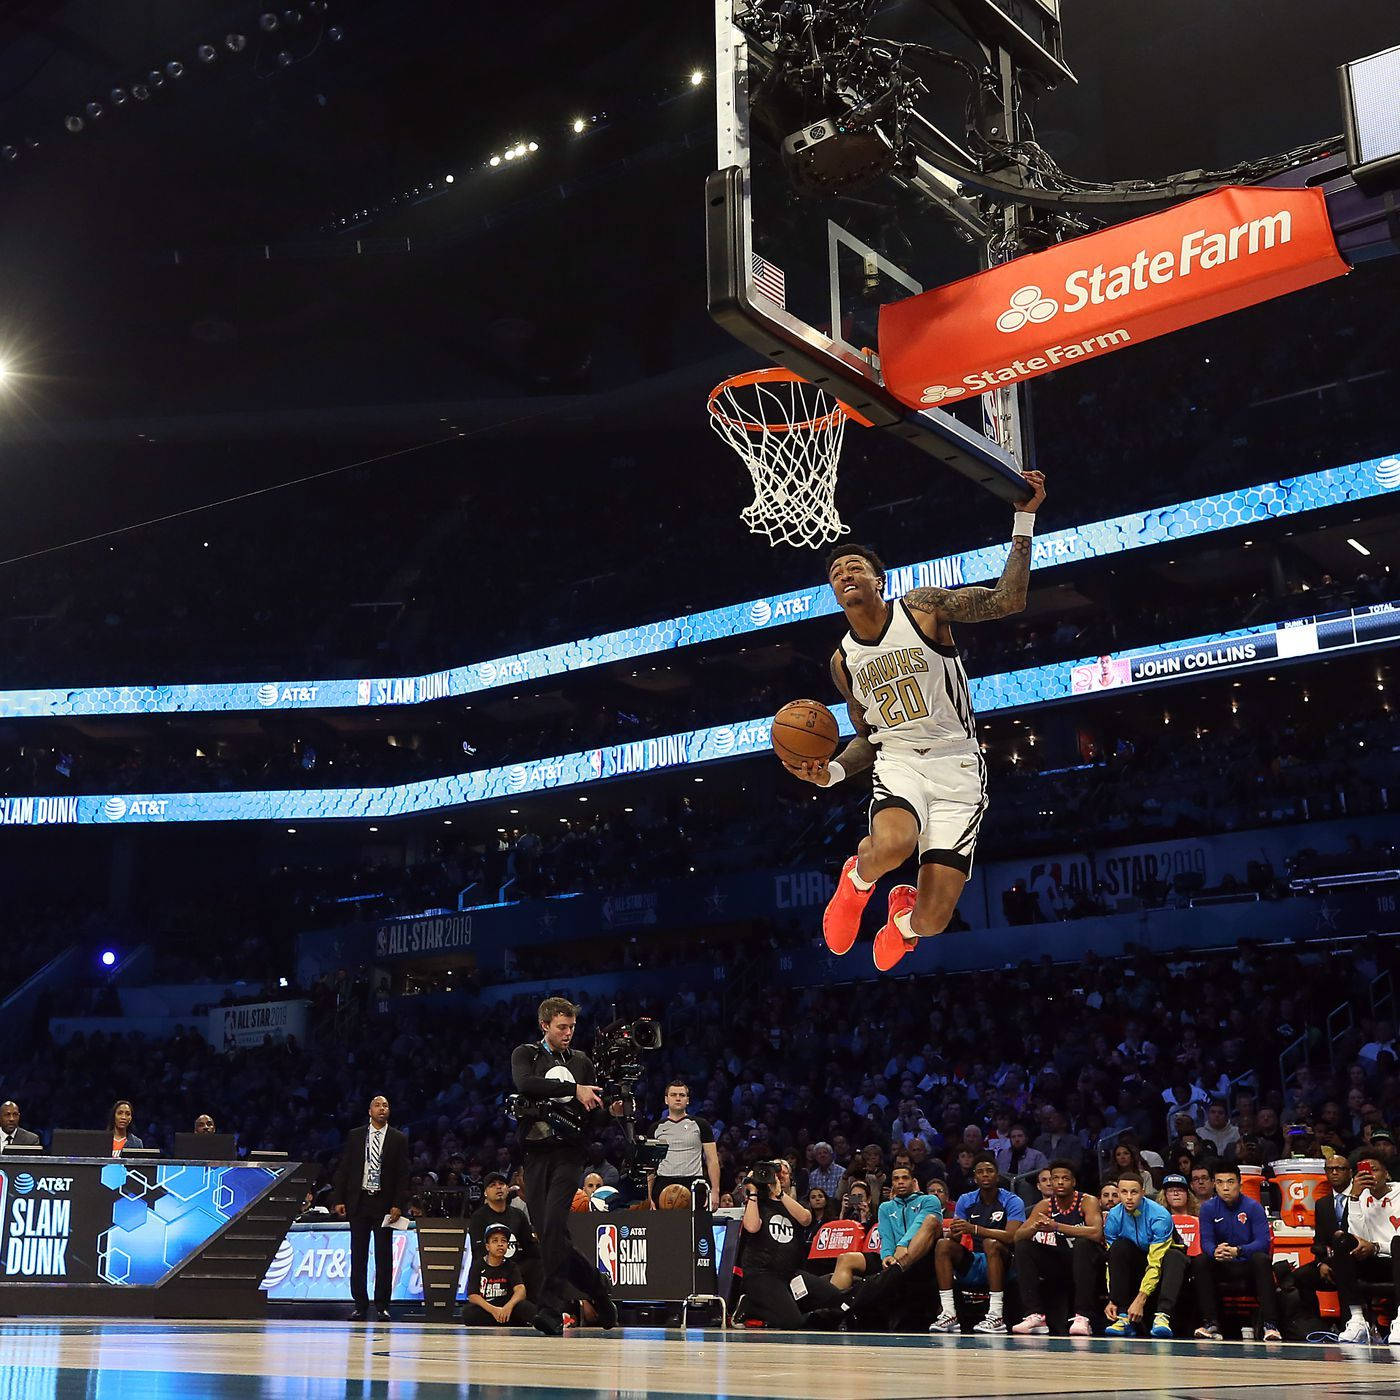 John Collins In His Remarkable Dunk Background